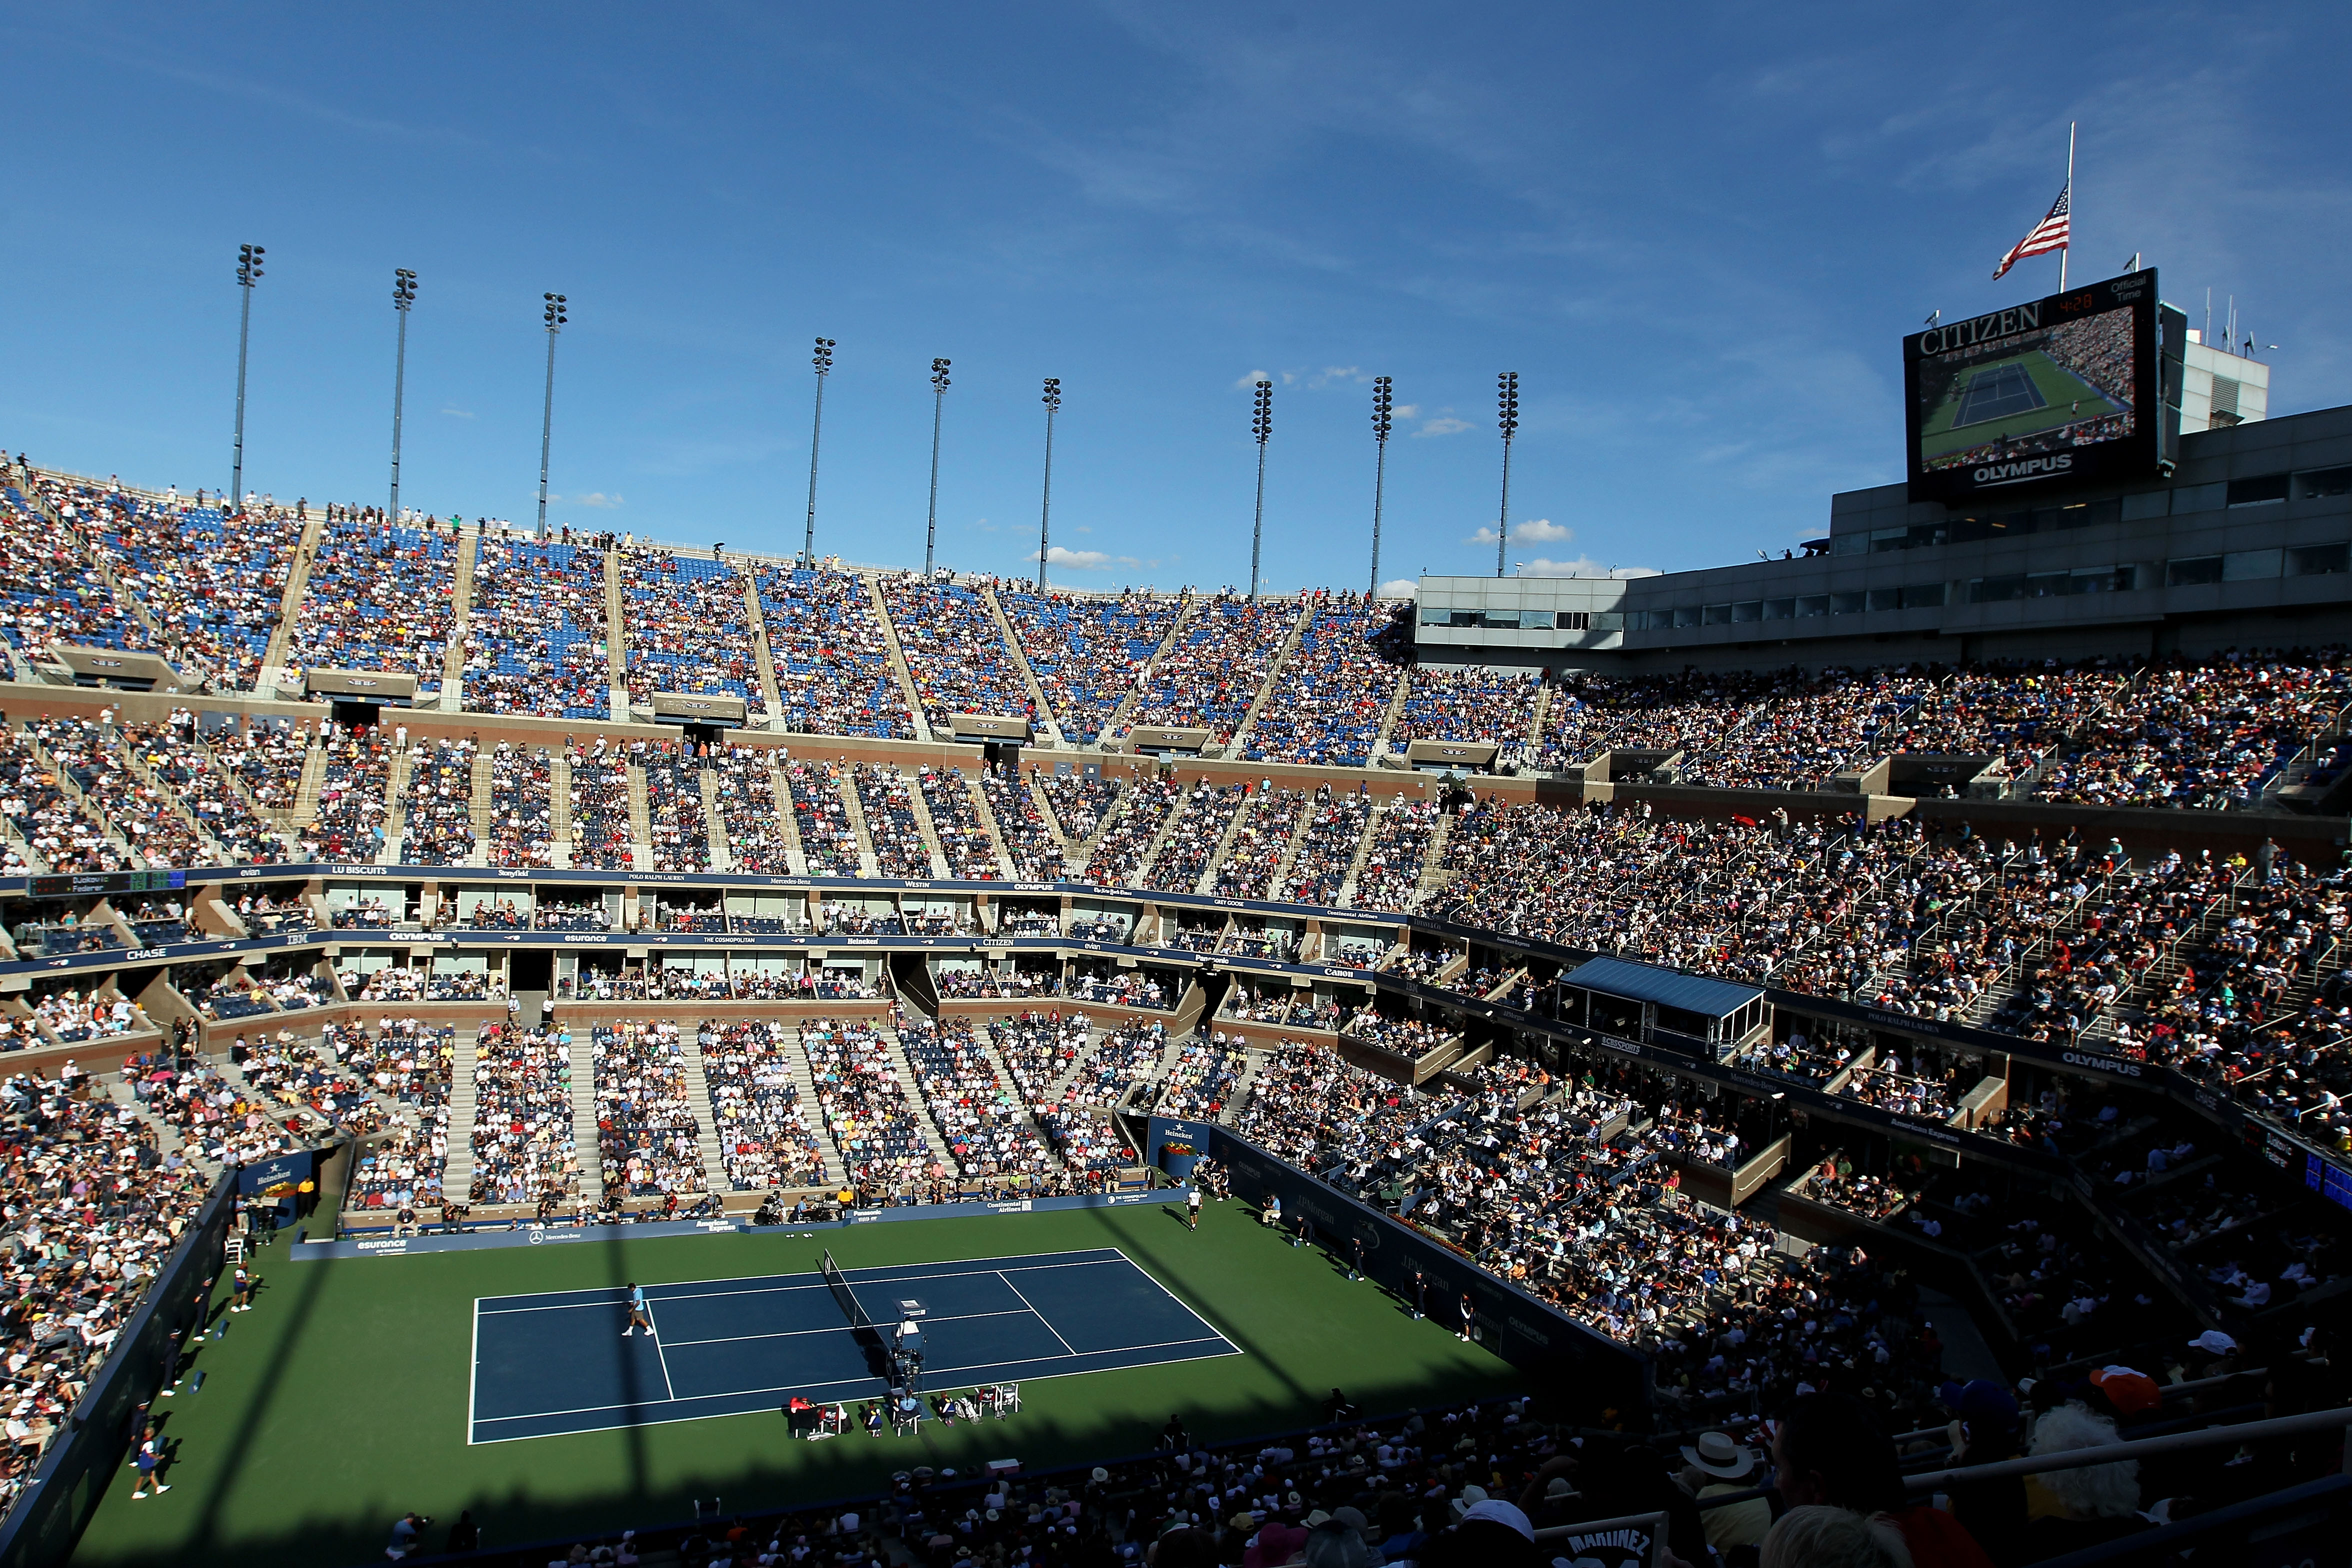 NEW YORK - SEPTEMBER 11:  A general view of Arthur Ashe Stadium is seen during the men's singles semifinal match between Roger Federer of Switzerland and Novak Djokovic of Serbia on day thirteen of the 2010 U.S. Open at the USTA Billie Jean King National